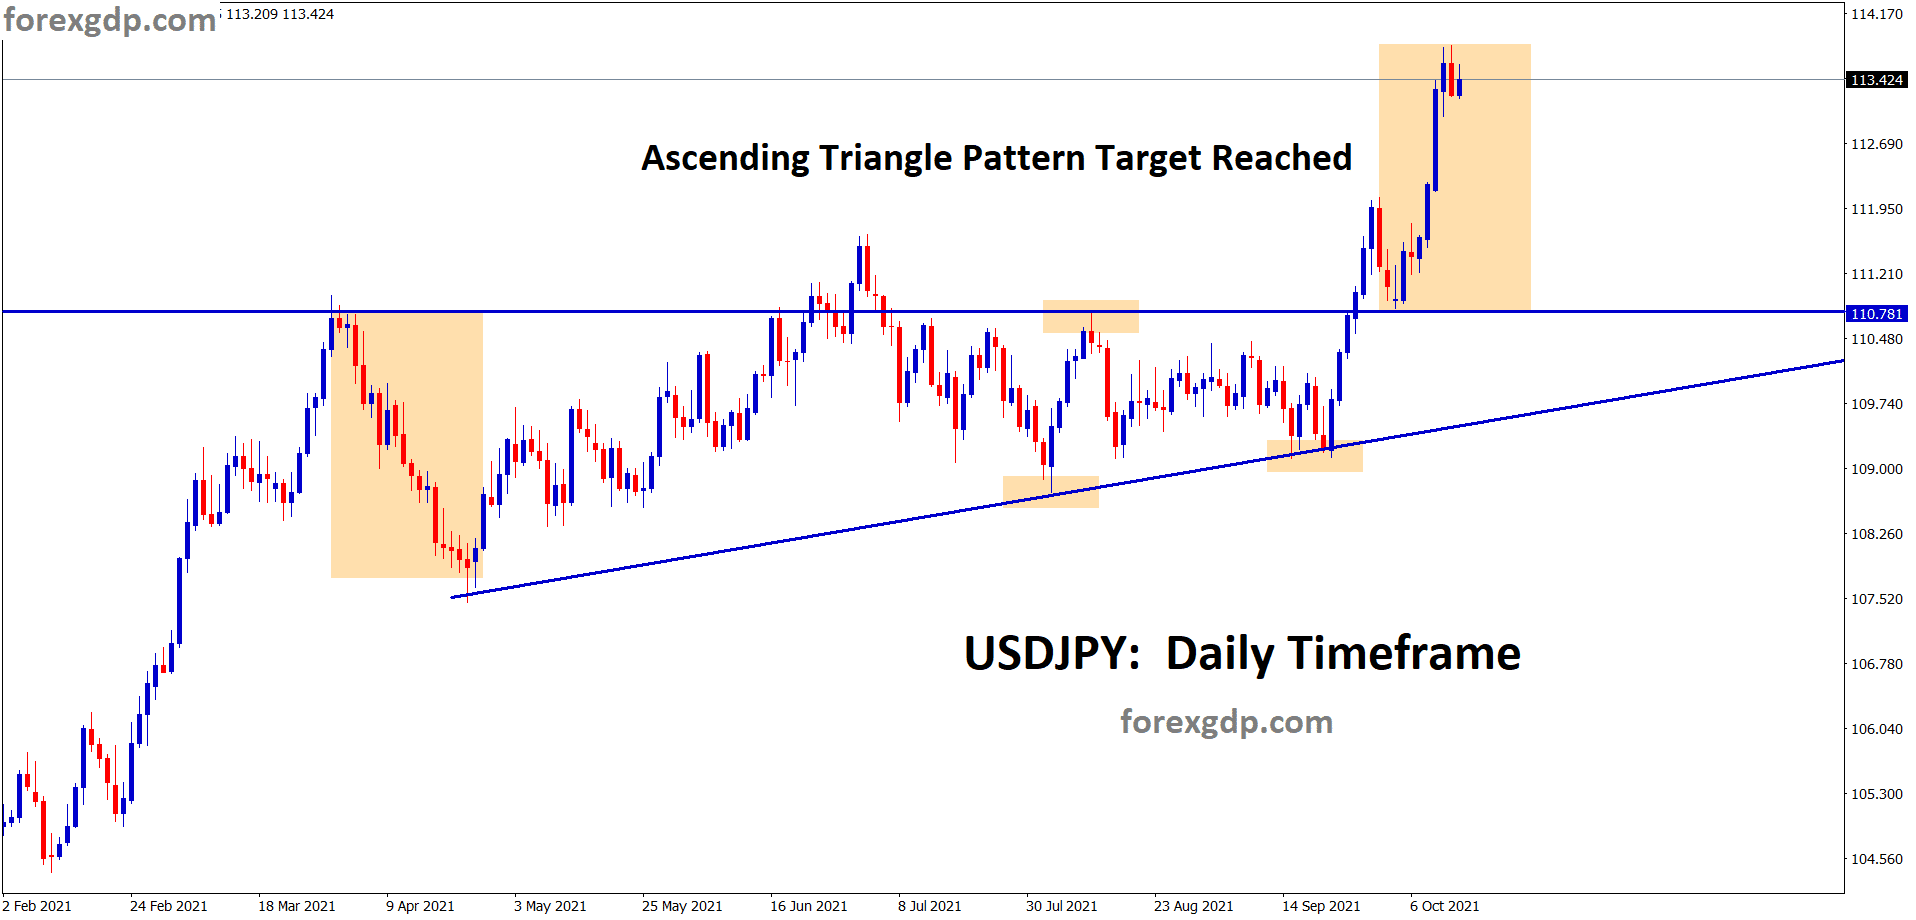 USDJPY has reached the ascending triangle pattern breakout target wait for some correction on USDJPY